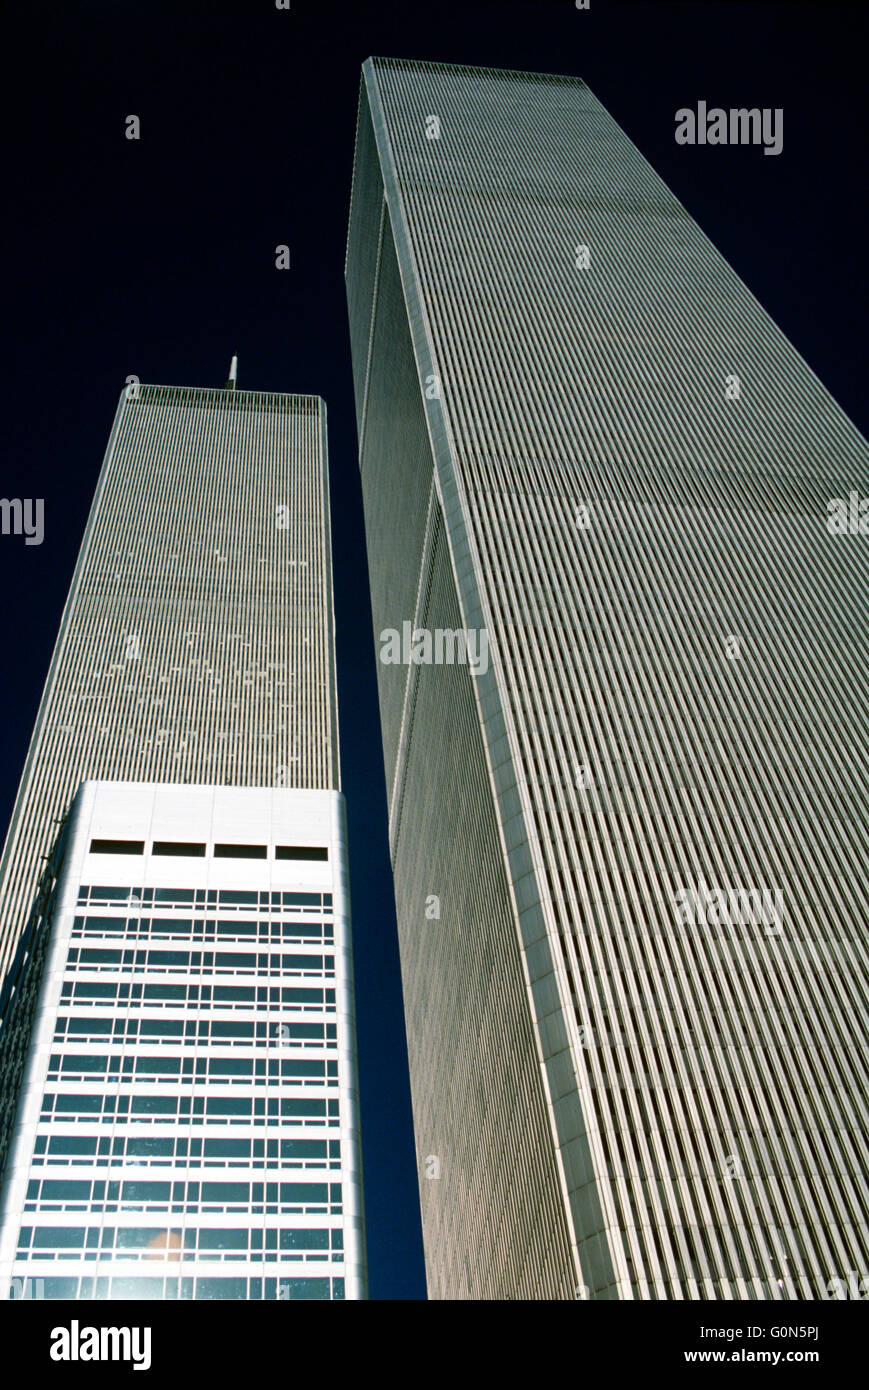 World Trade Center, New York City, Twin Towers, Nine Eleven, skyscrapers, concrete, glass, steel, office tower Stock Photo